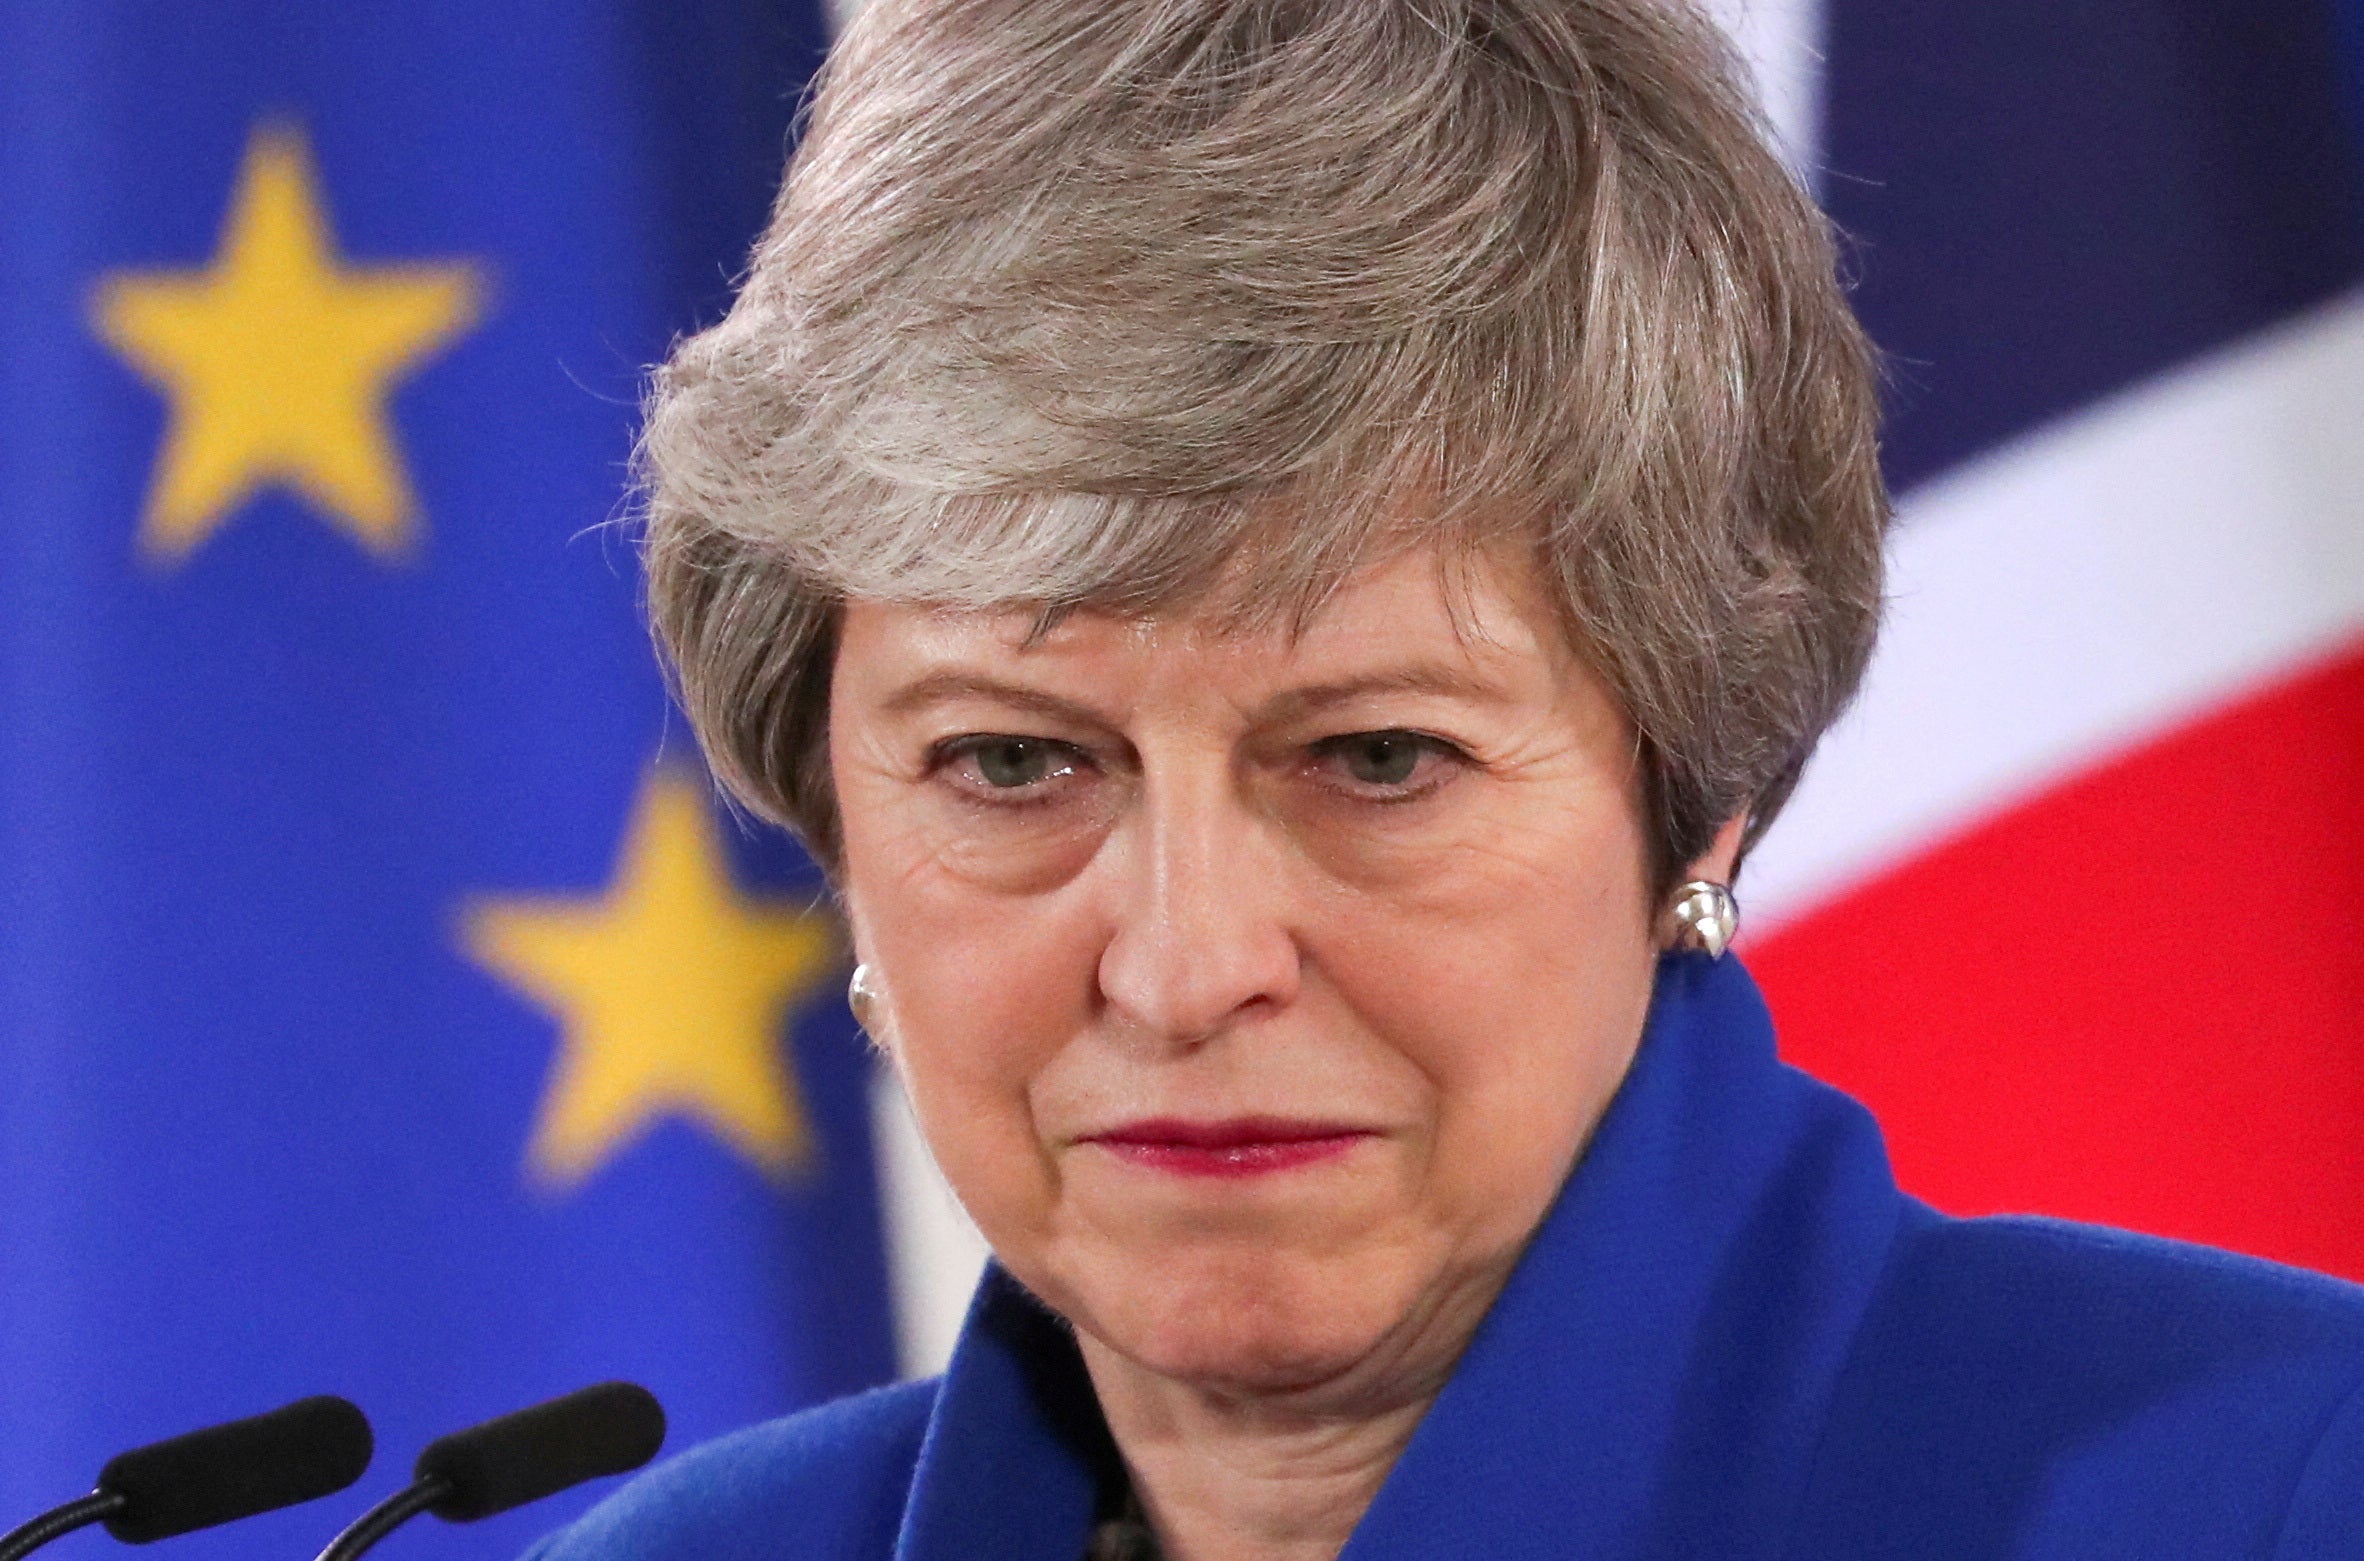 Theresa May resigned after failing to get her Brexit deal through parliament